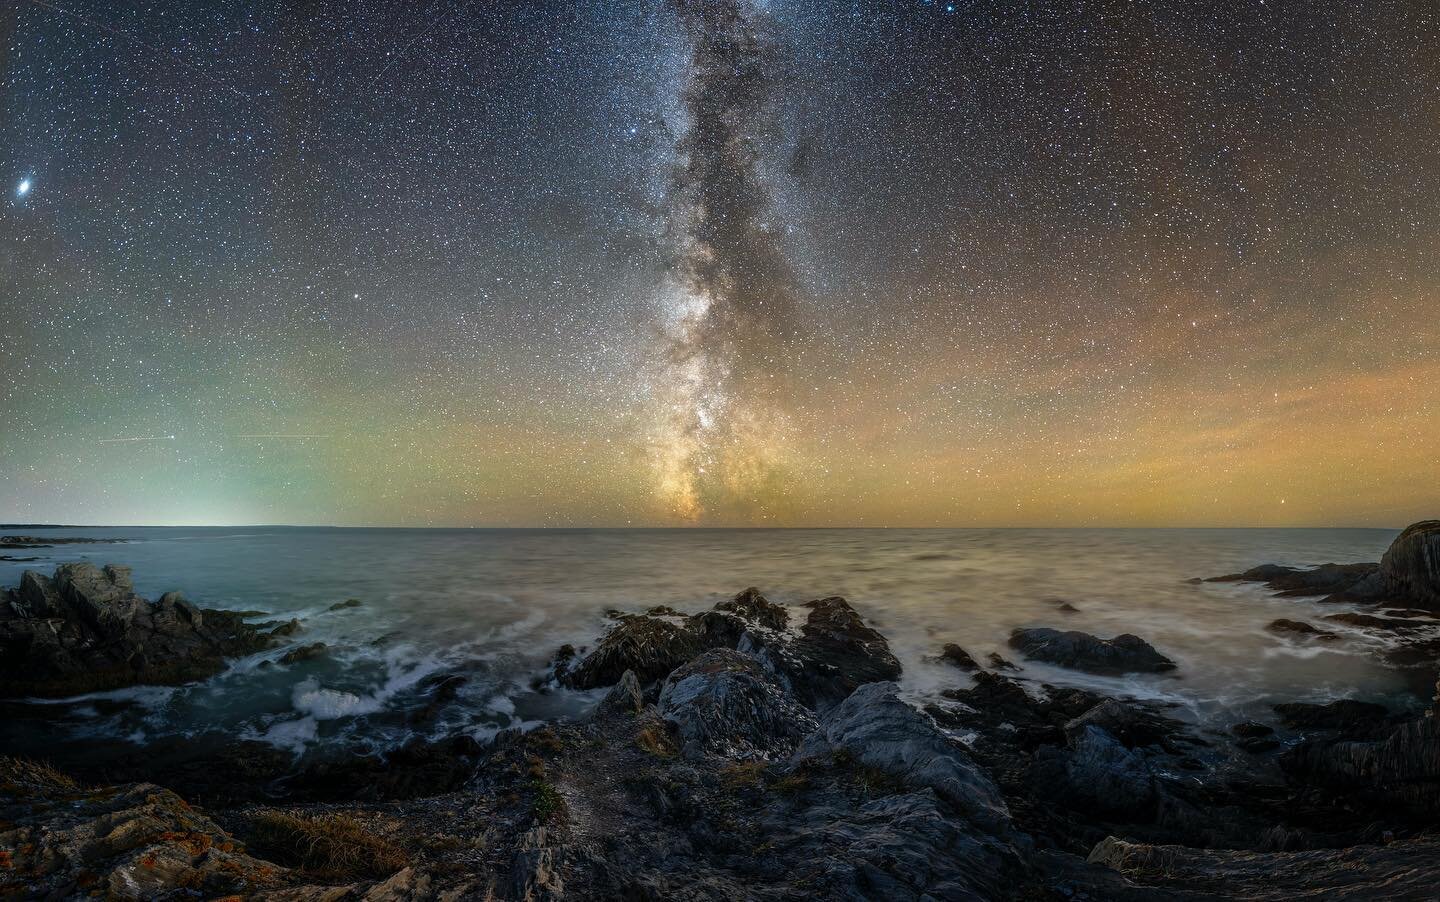 I&rsquo;m able to create this image because I possess experience in the following:
1. Photographing the Milky Way
2. Photographing panoramics 
3. Photoshop

Yep, I&rsquo;m doing my first Photoshop training tonight, and before I talk about this pictur